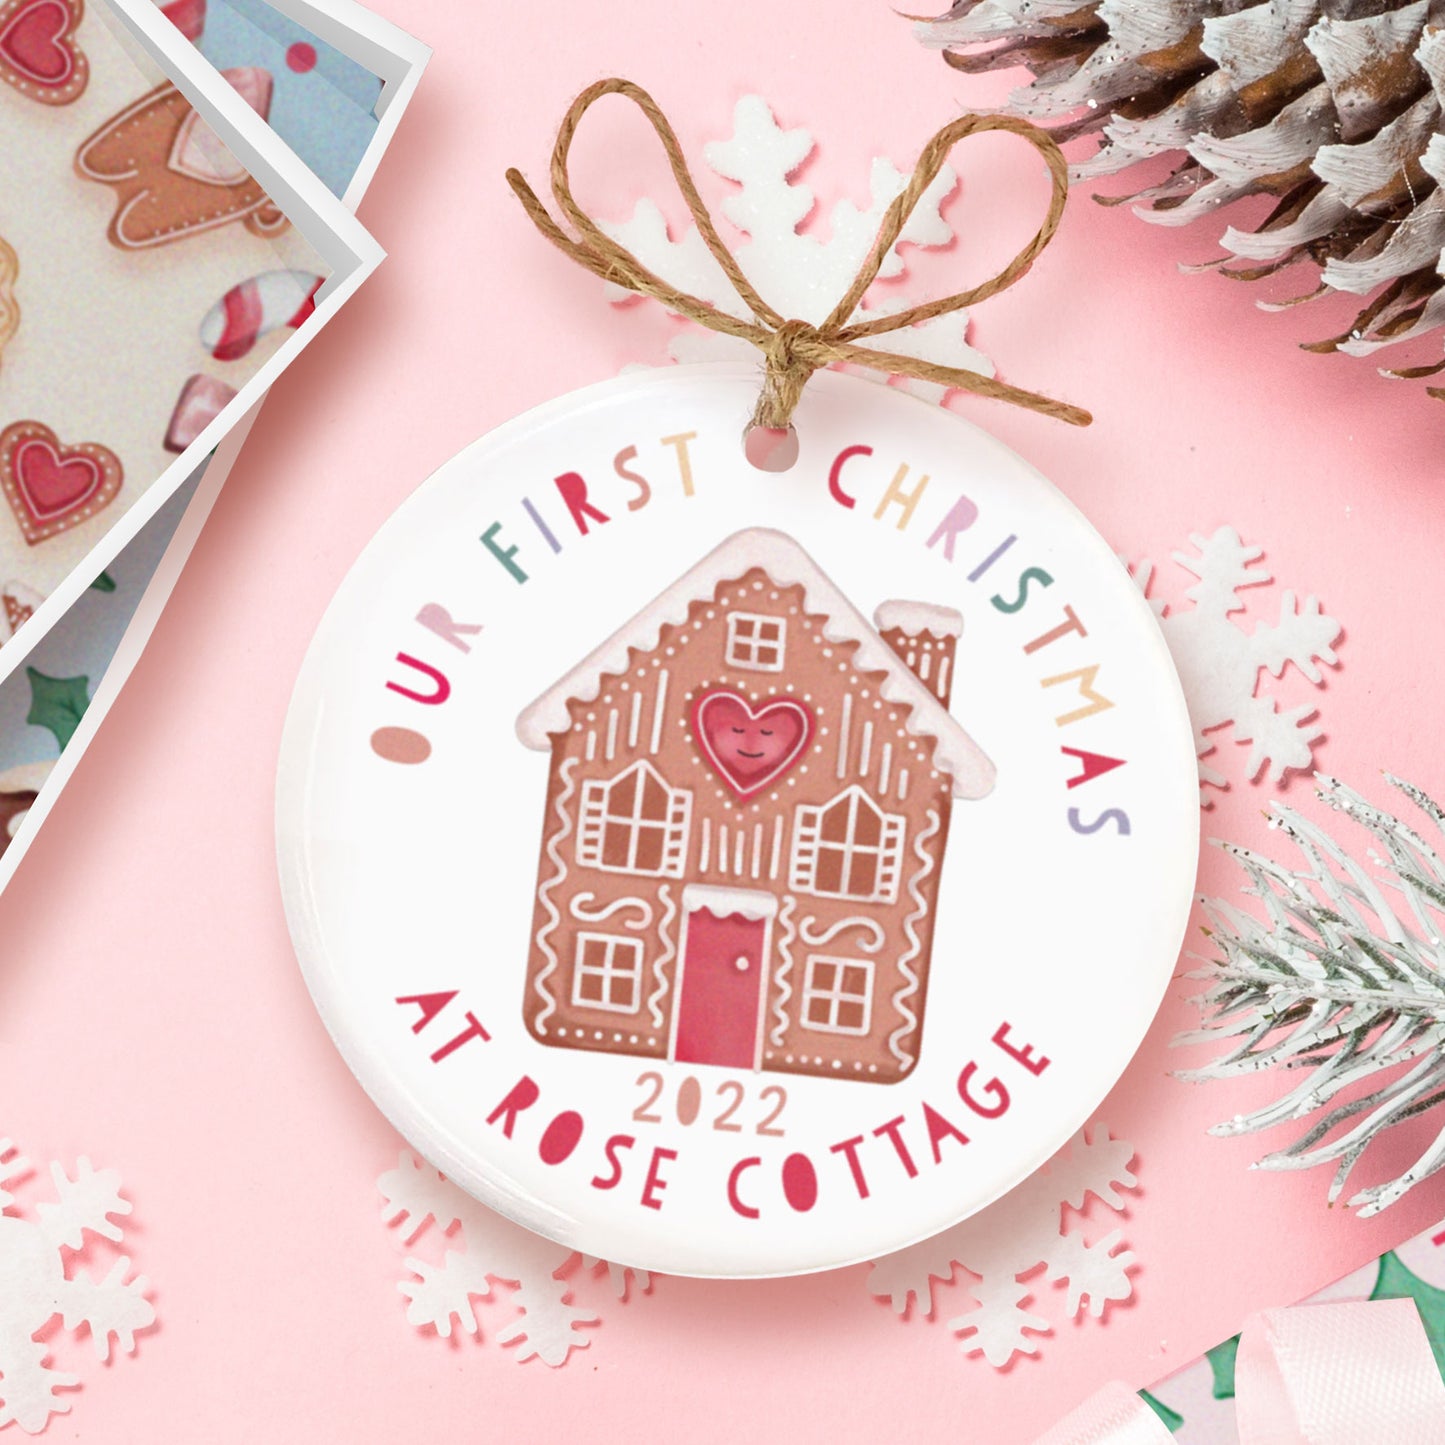 Our First Christmas Gingerbread House Ceramic Decoration. Christmas Bauble. Personalised Christmas Ceramic ornament